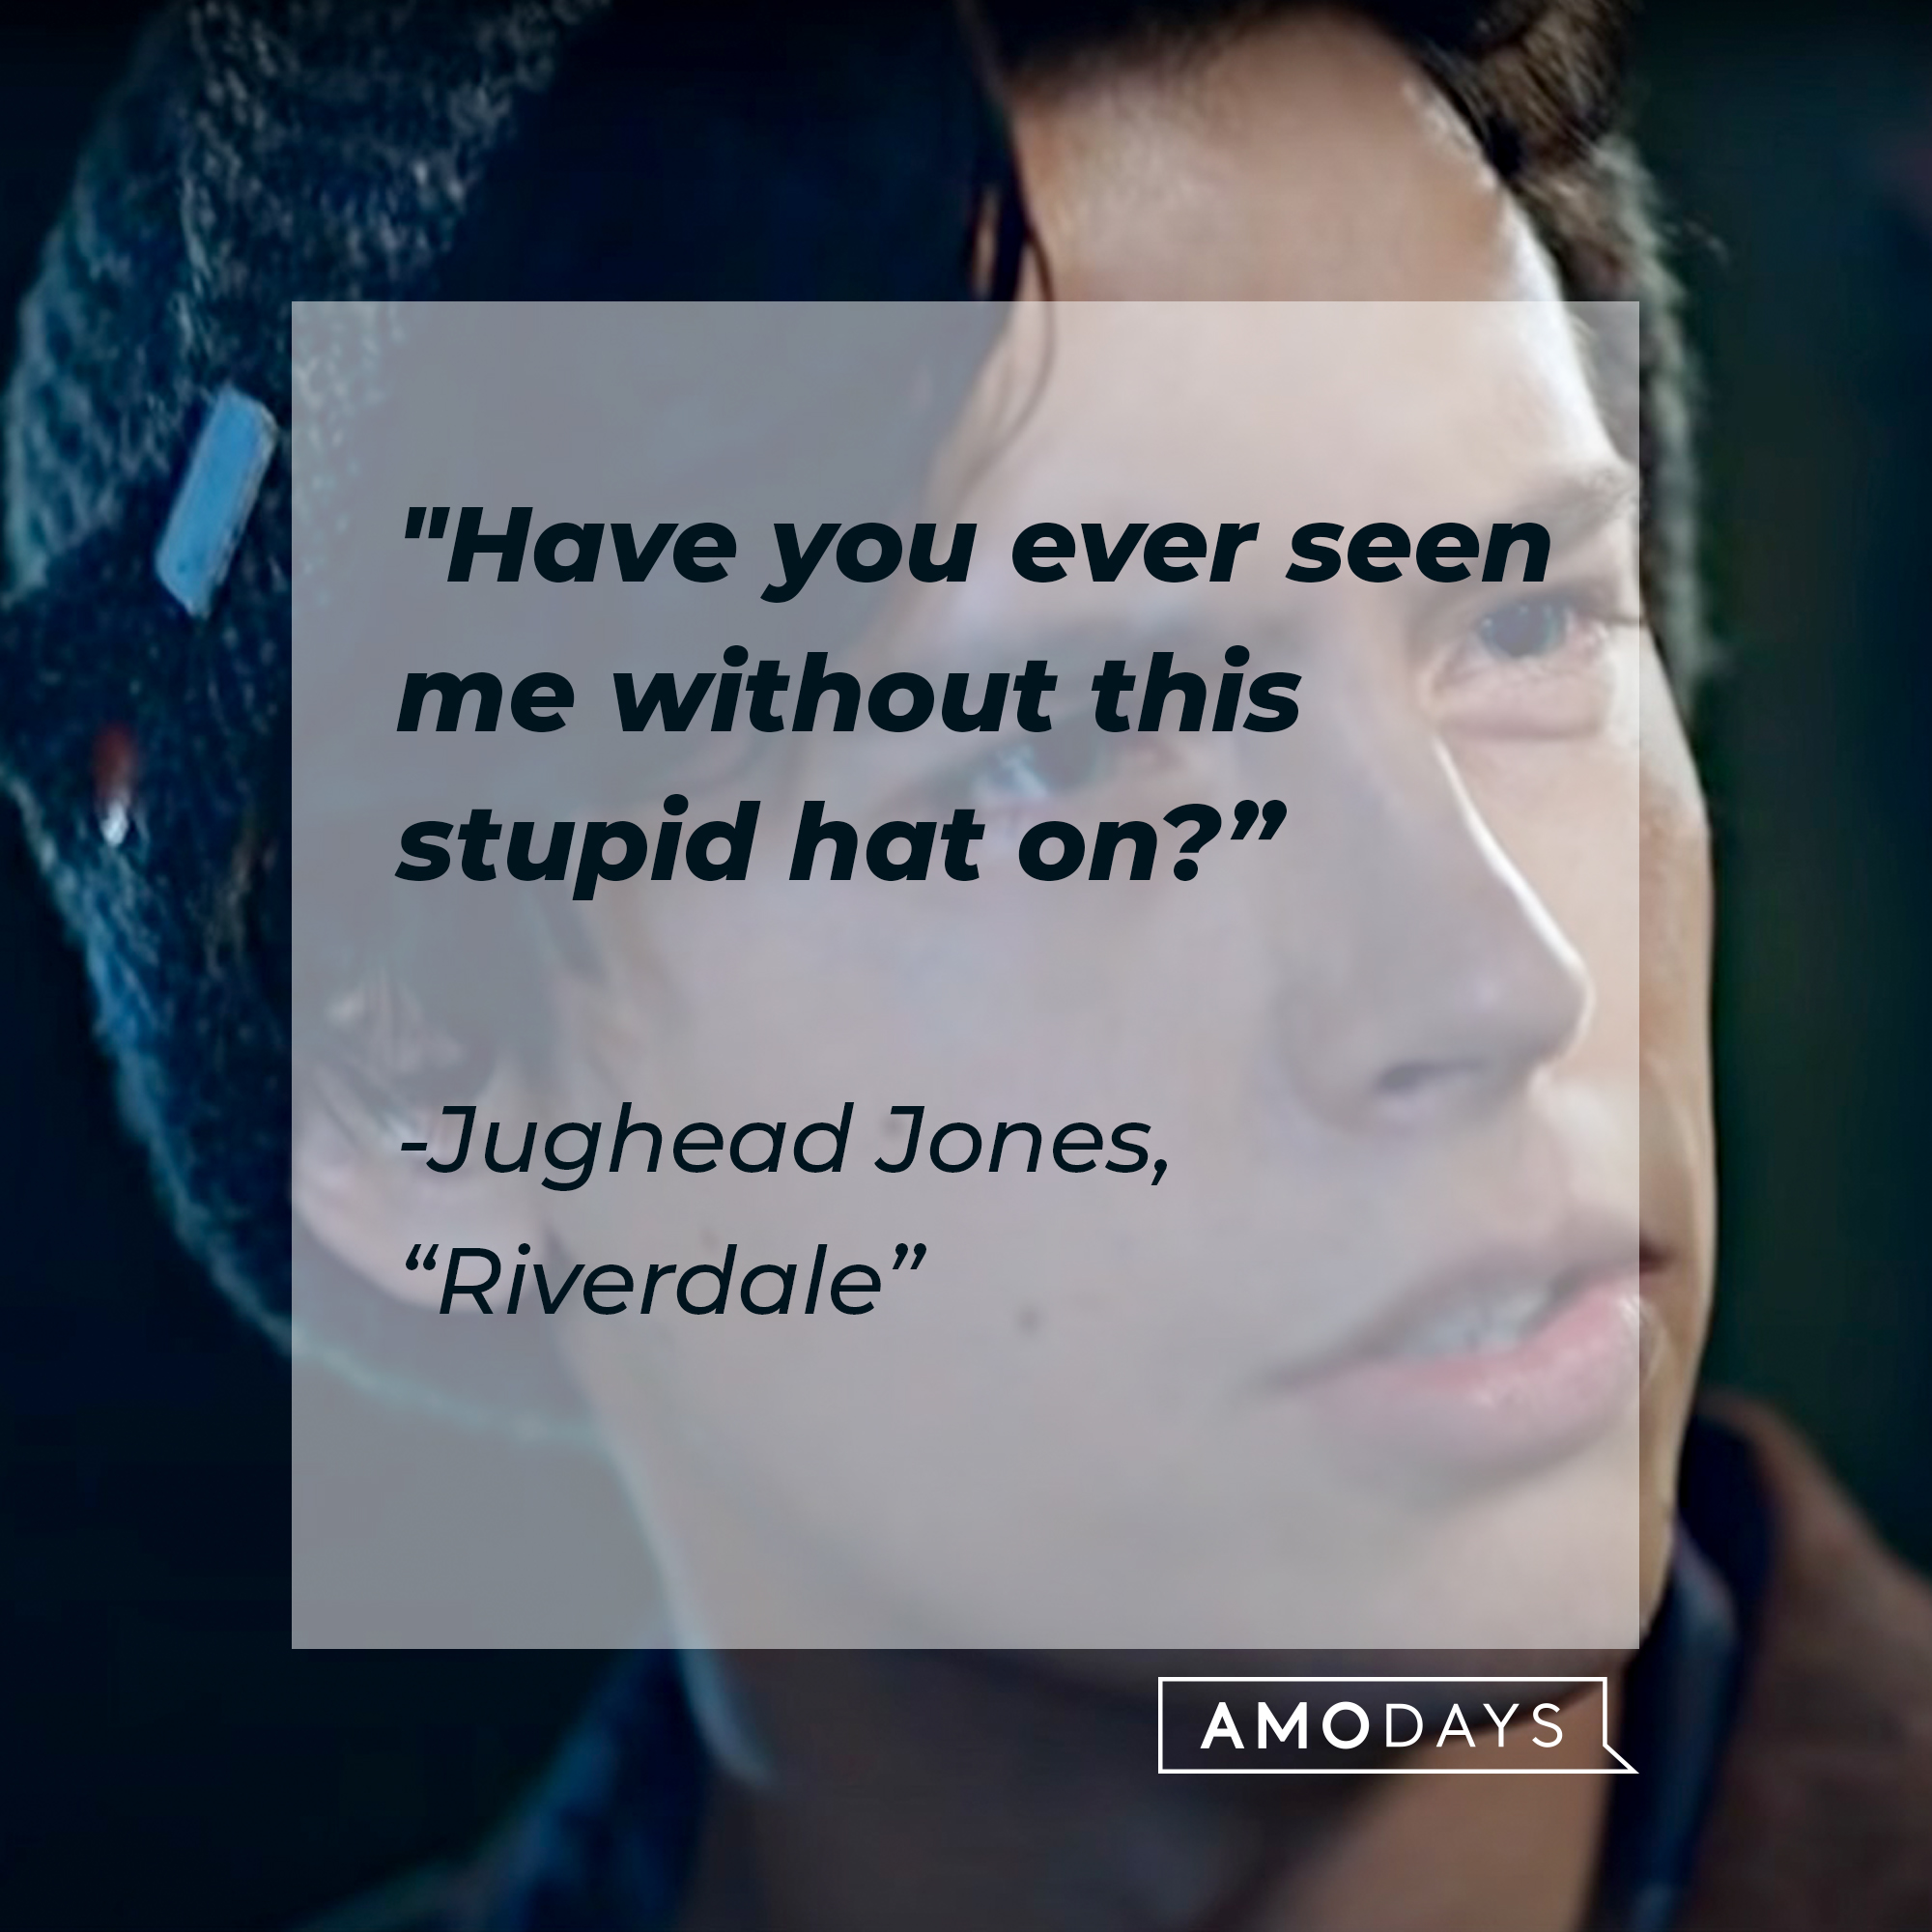 Image of Cole Sprouse as Judhead Jones in "Riverdale" with the quote: "Have you ever seen me without this stupid hat on?” | Source: facebook.com/Riverdale